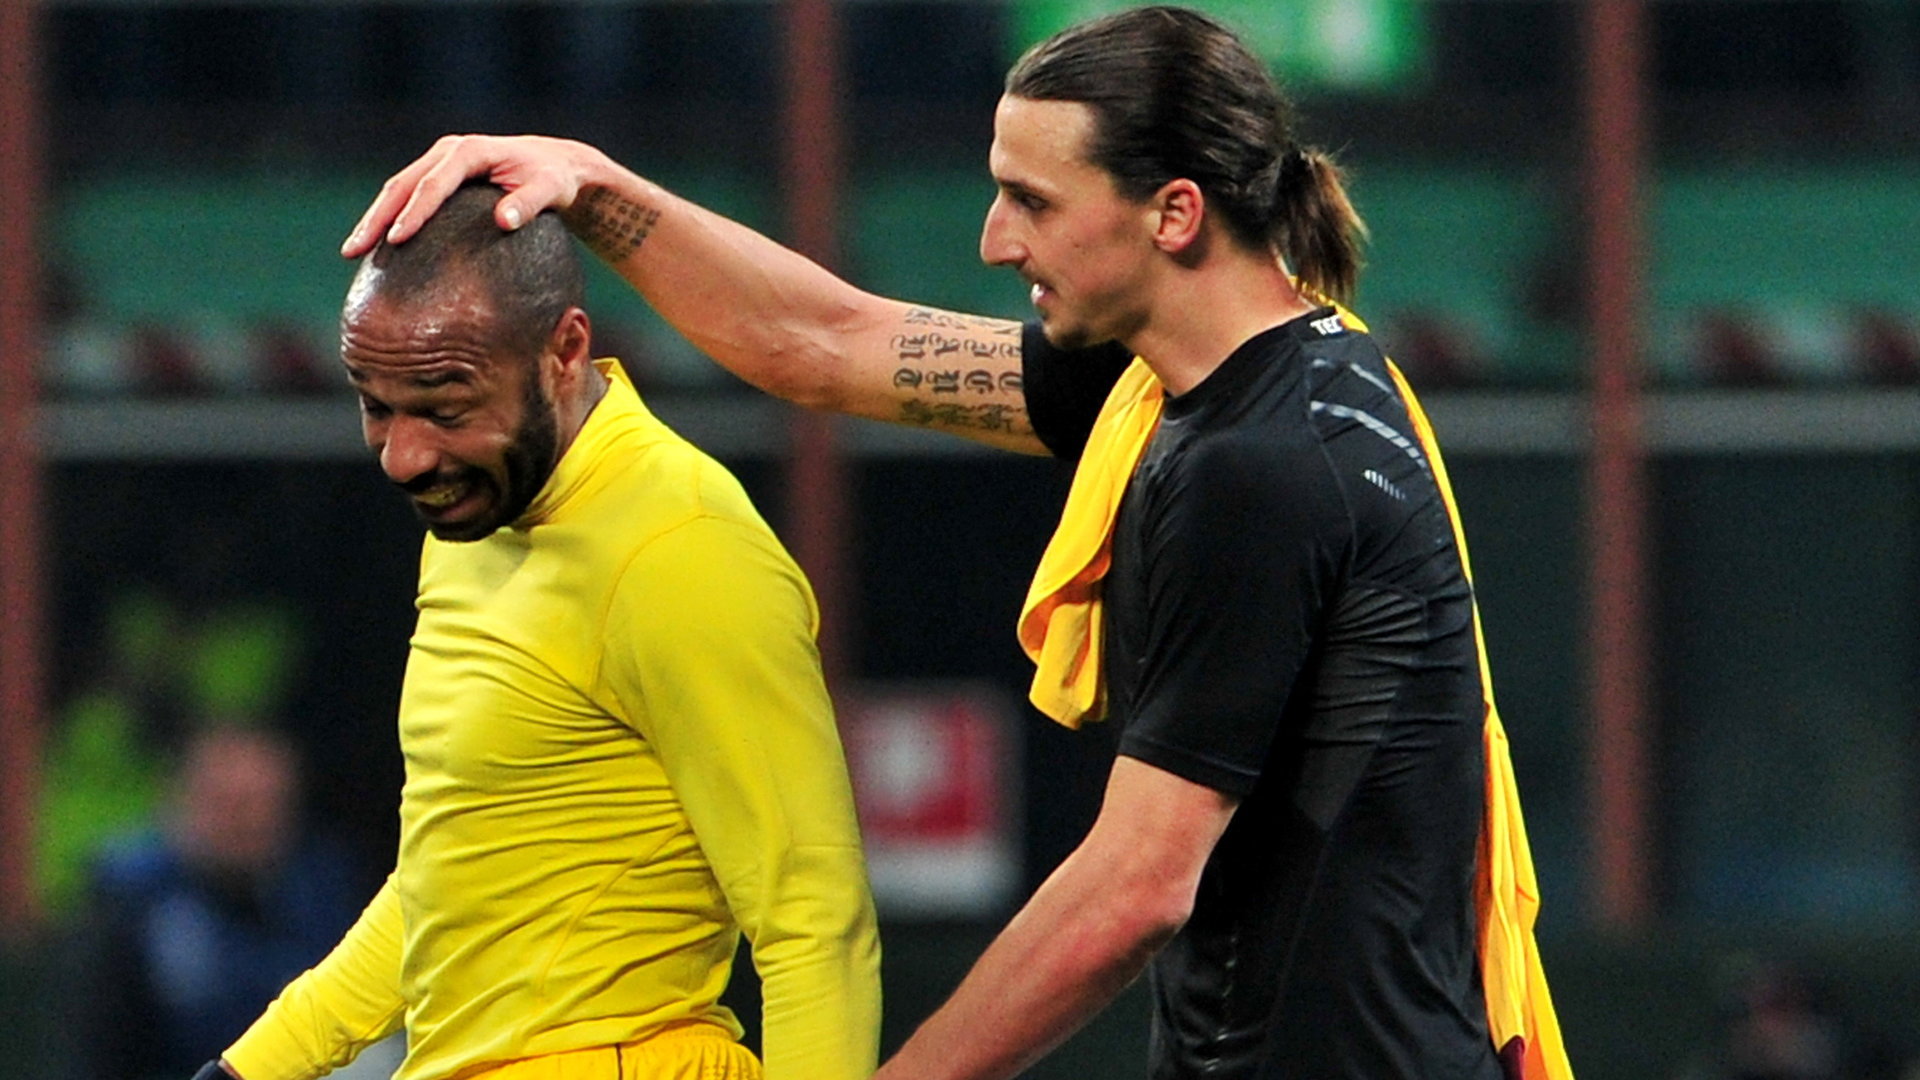  Thierry Henry and Zlatan Ibrahimovic embrace after a football match.